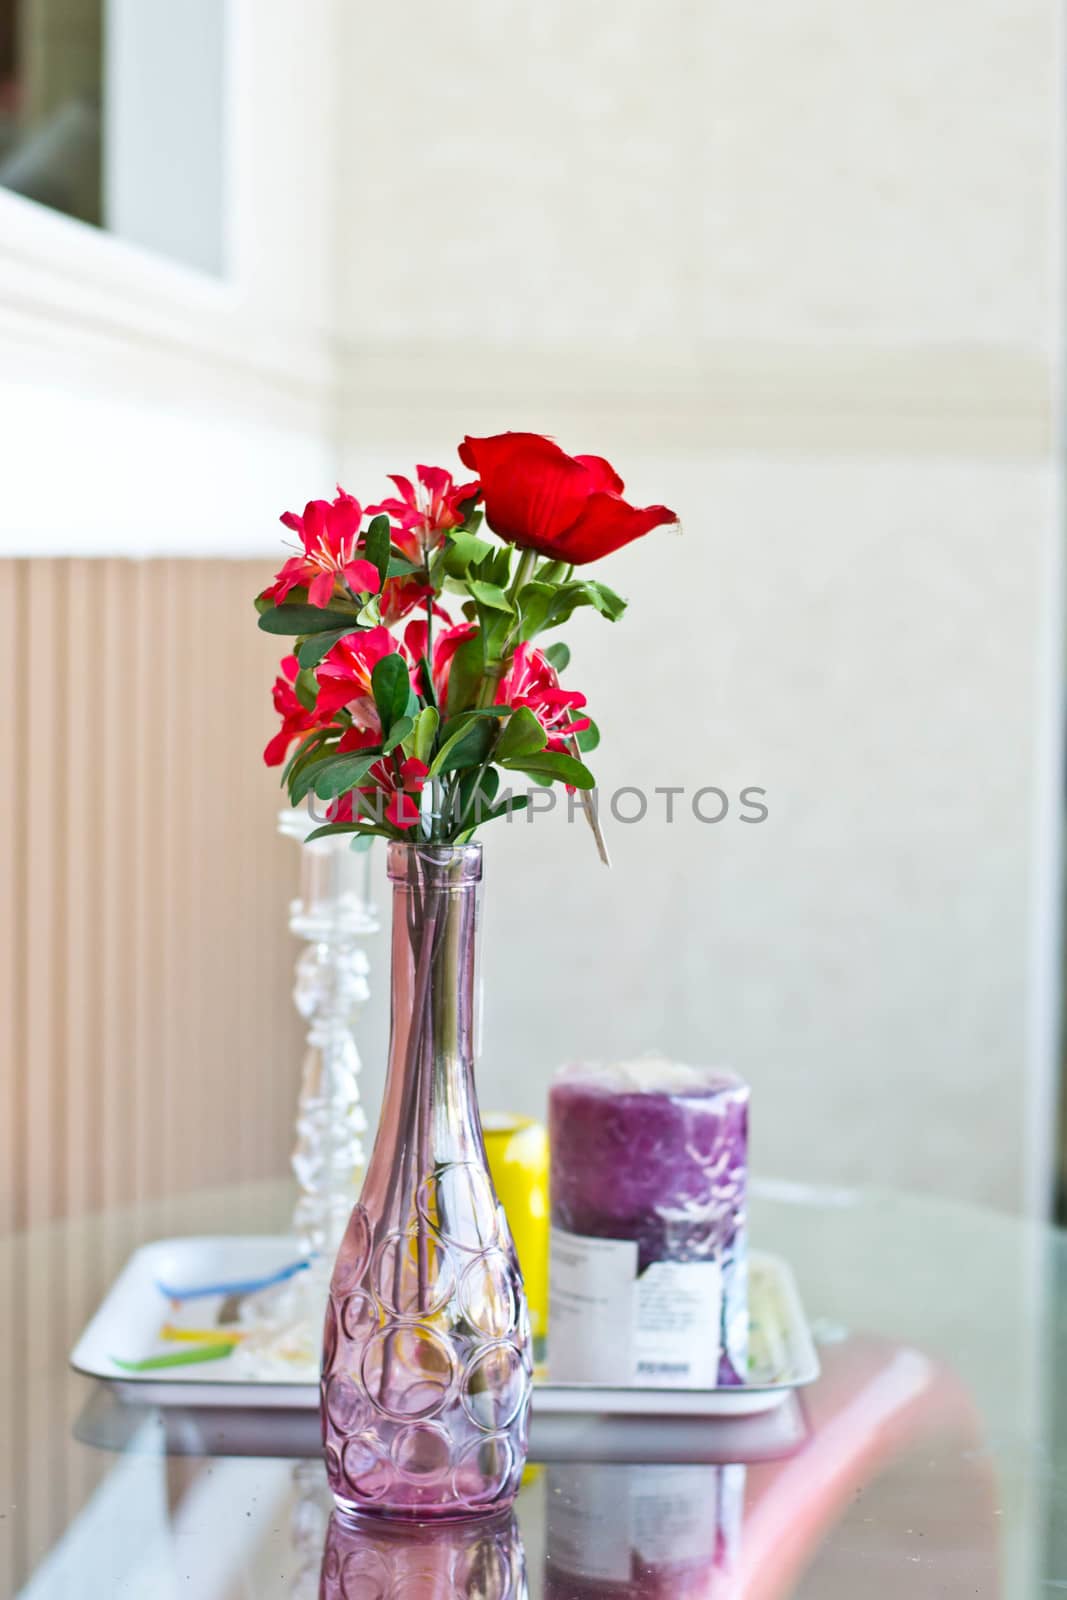 Flowers in a vase on the table by Thanamat